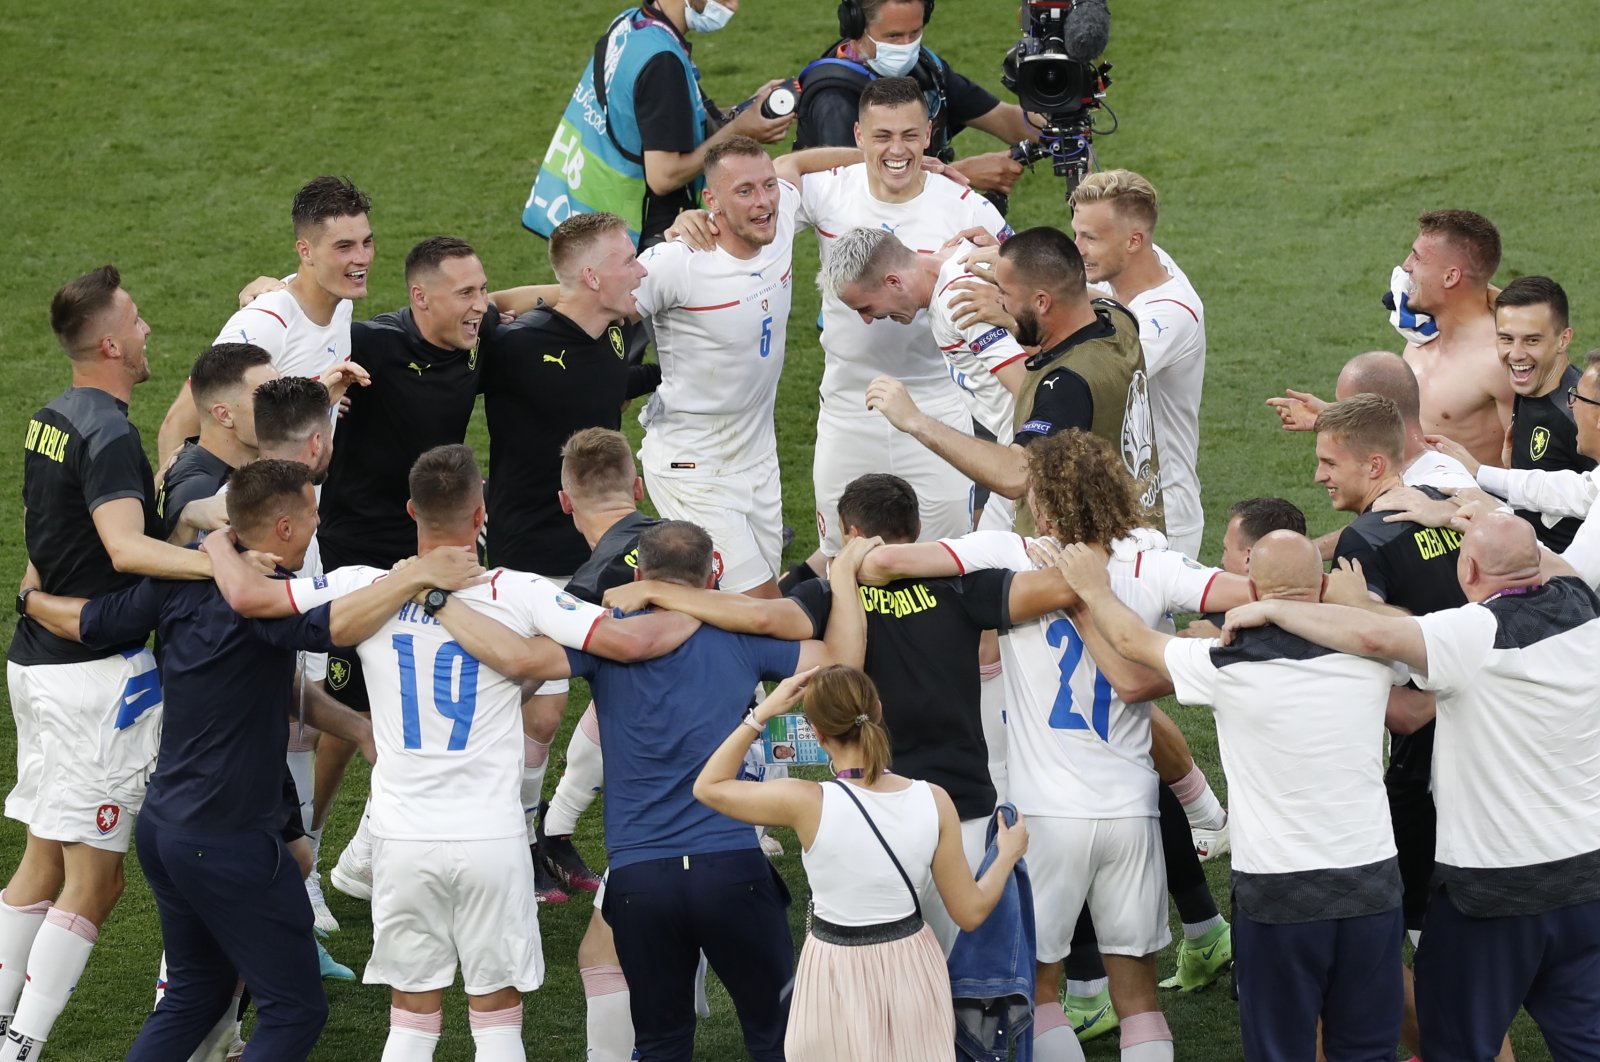 Czech Republic players celebrate winning their Euro 2020 round of 16 match between the Netherlands and the Czech Republic at the Ferenc Puskas Stadium in Budapest, Hungary, June 27, 2021. (AP Photo)